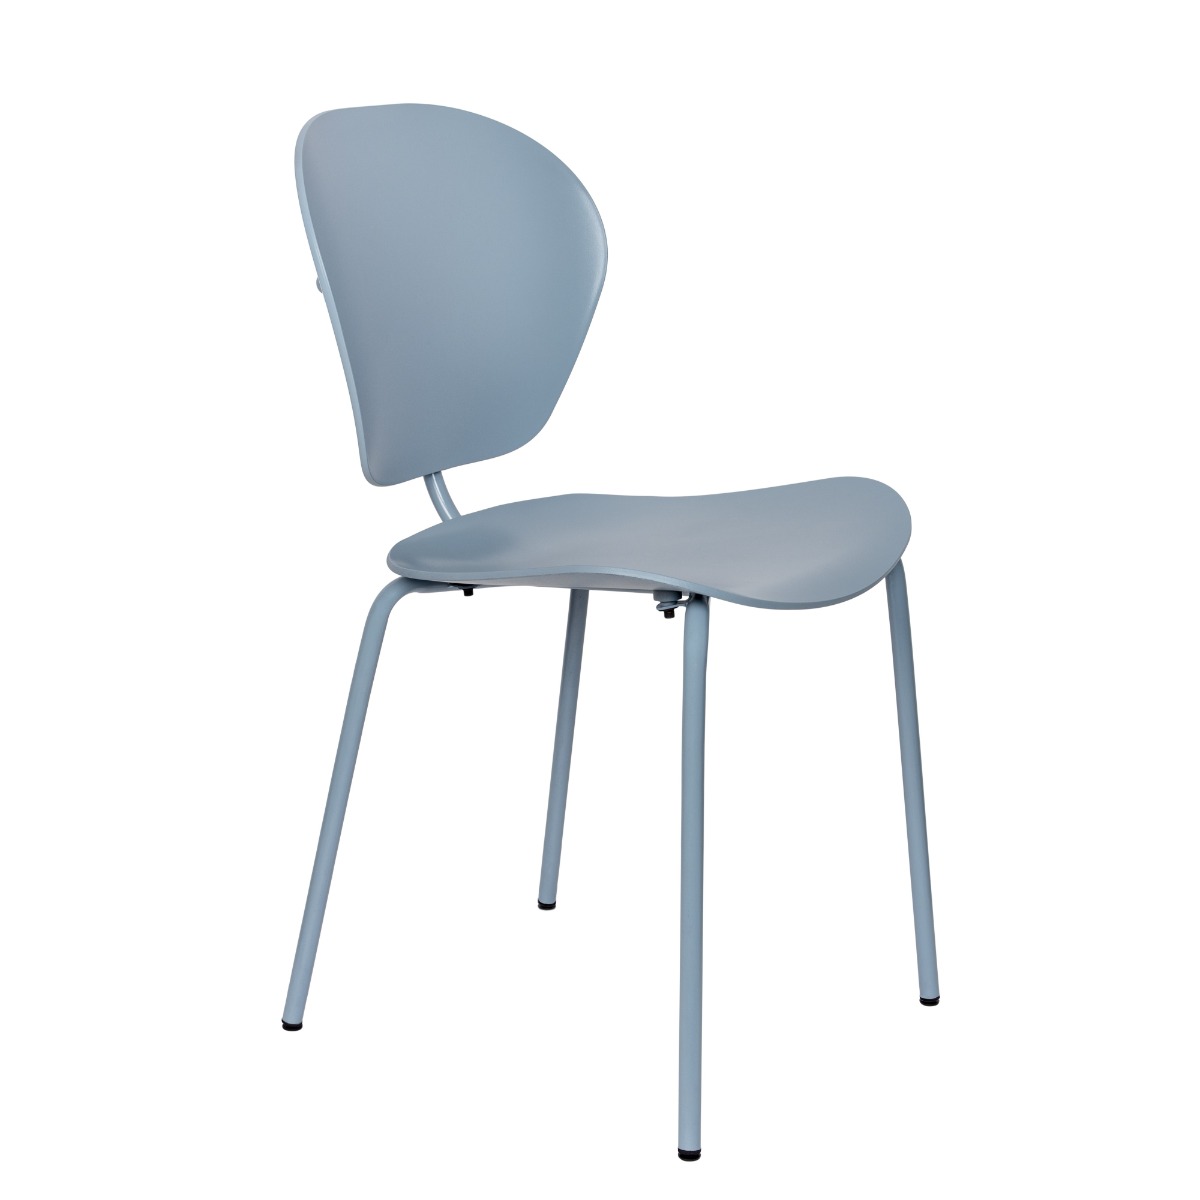 The Ocean Rice Dining Chair in Blue